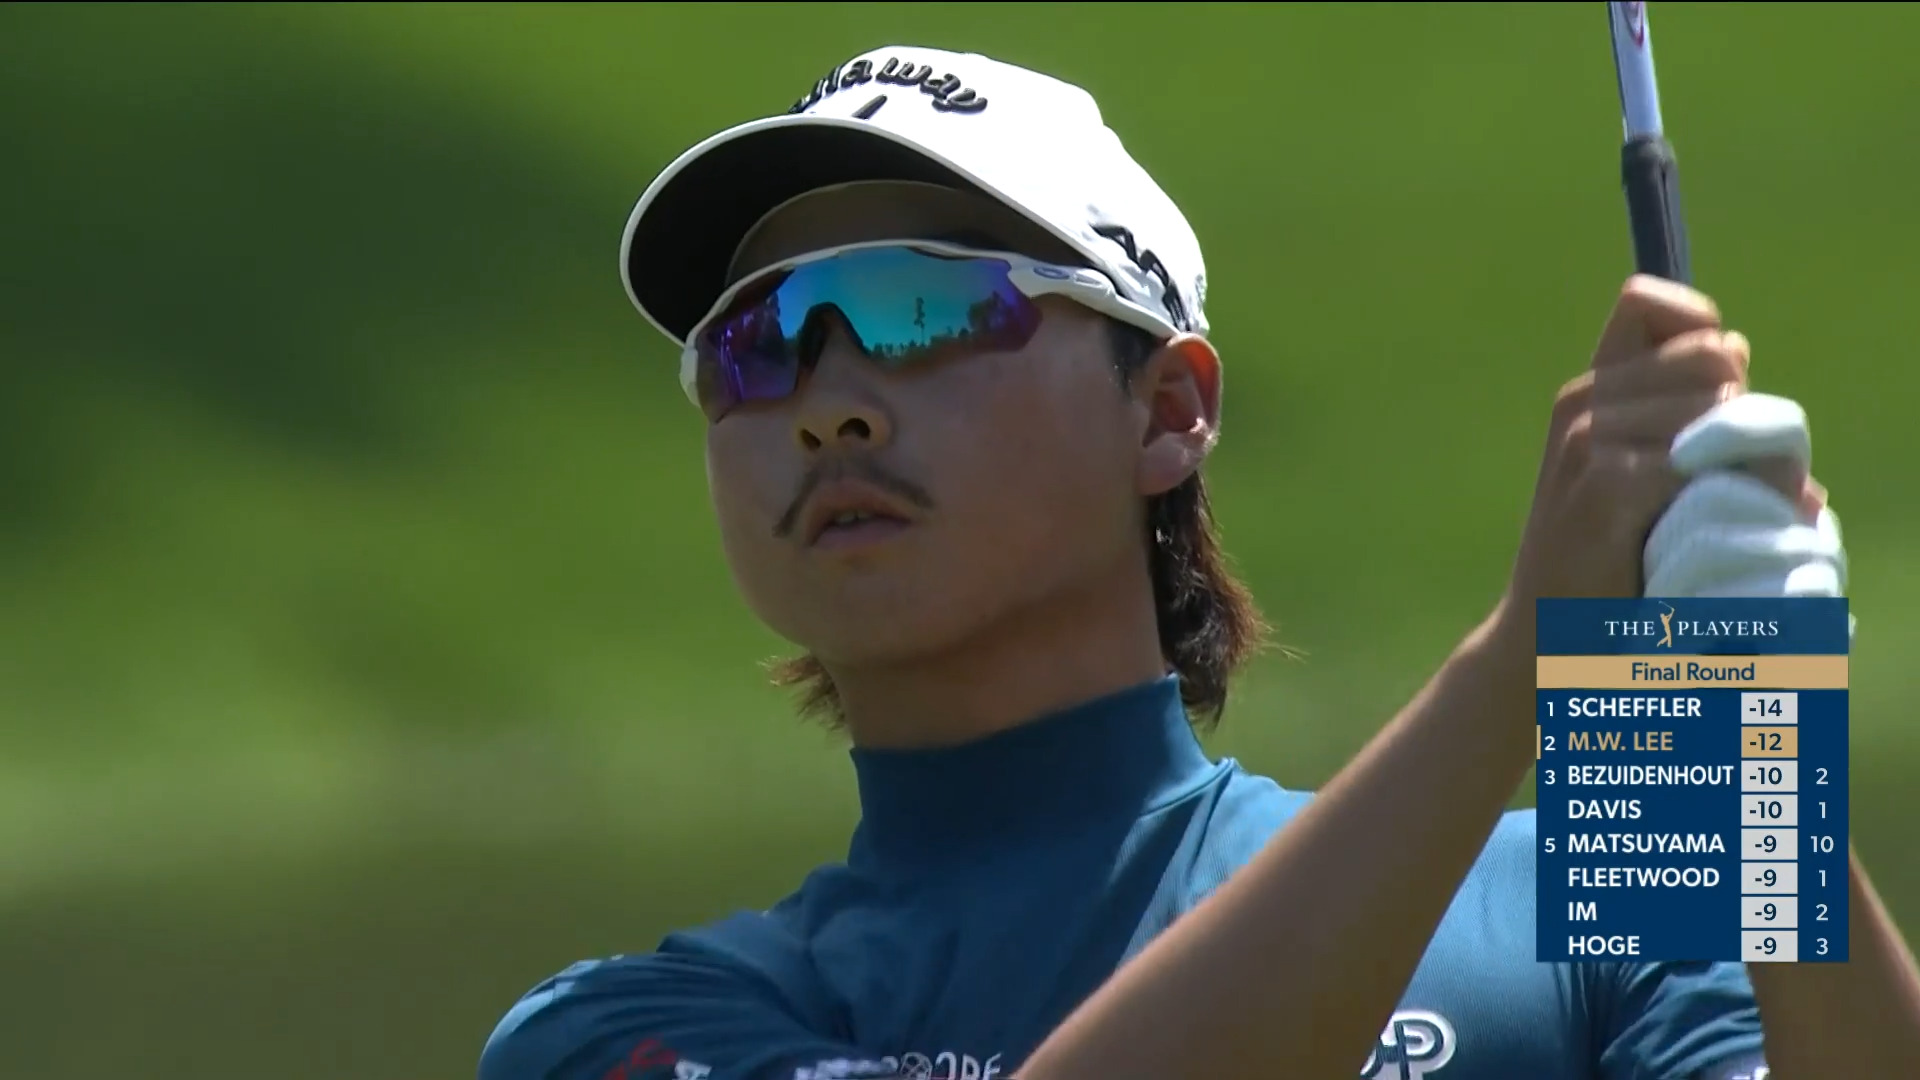 Min Woo Lee rides up-and-down day to best TOUR finish - PGA TOUR